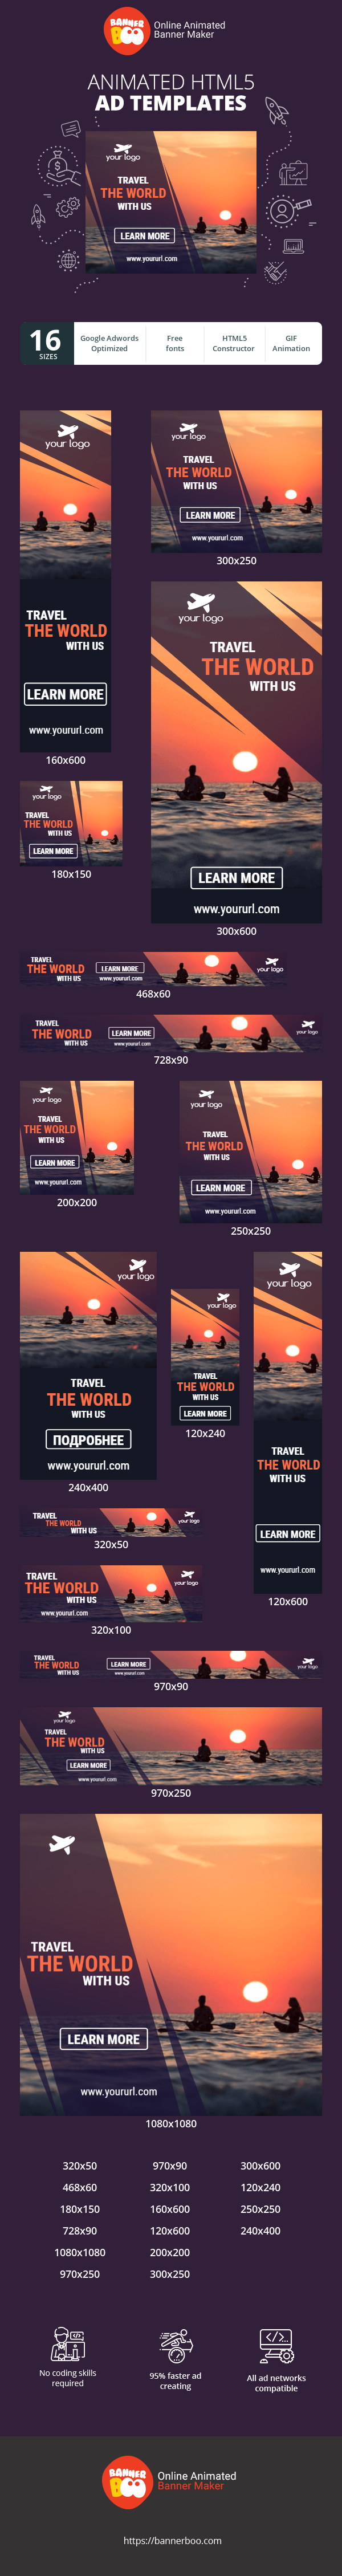 Banner ad template — Travel The World With Us!